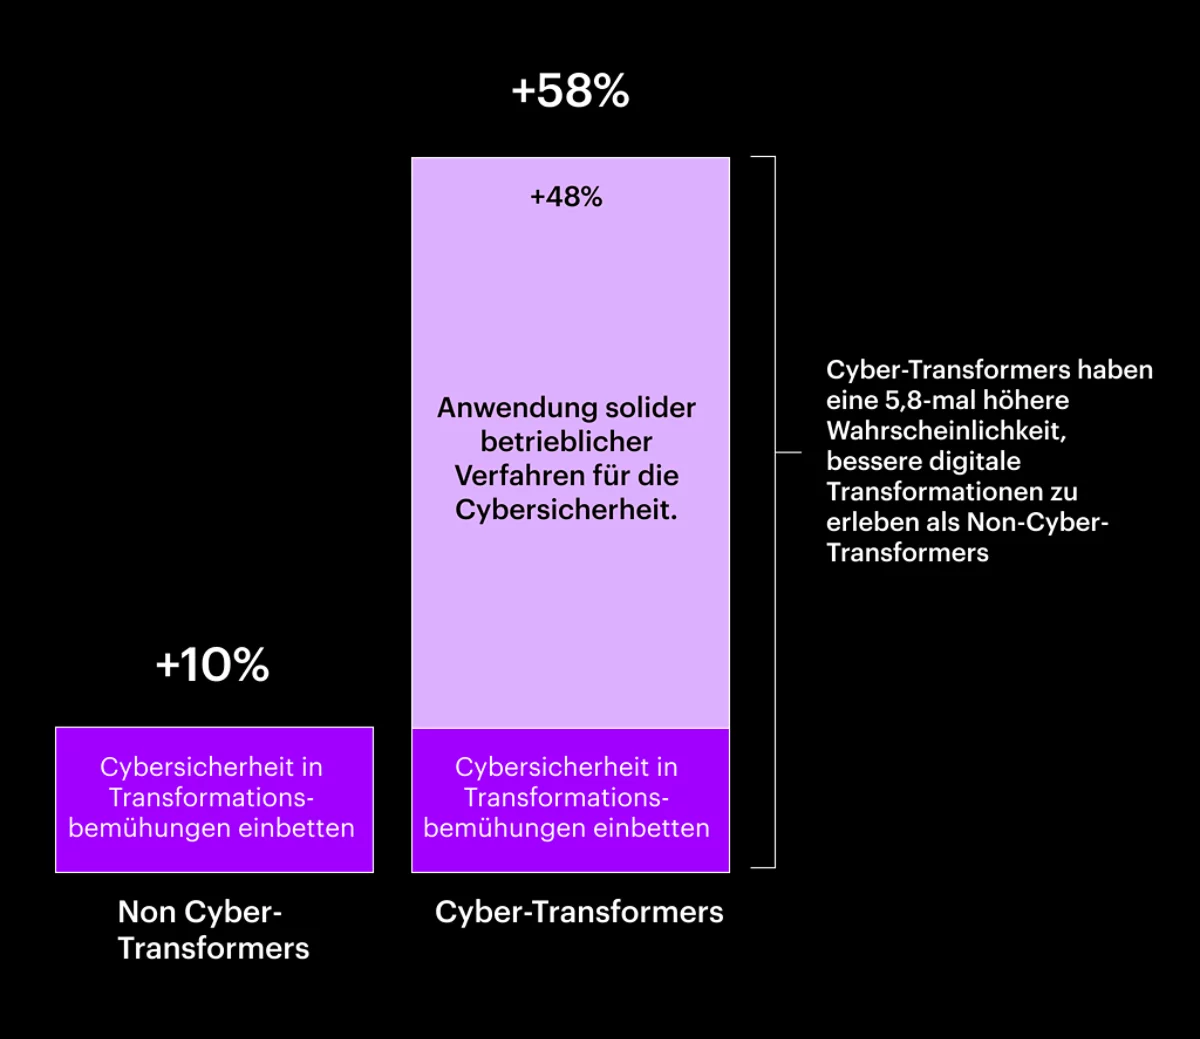 Graph to show Cybersecurity transformers are more likely to experience better digital transformation than the rest.